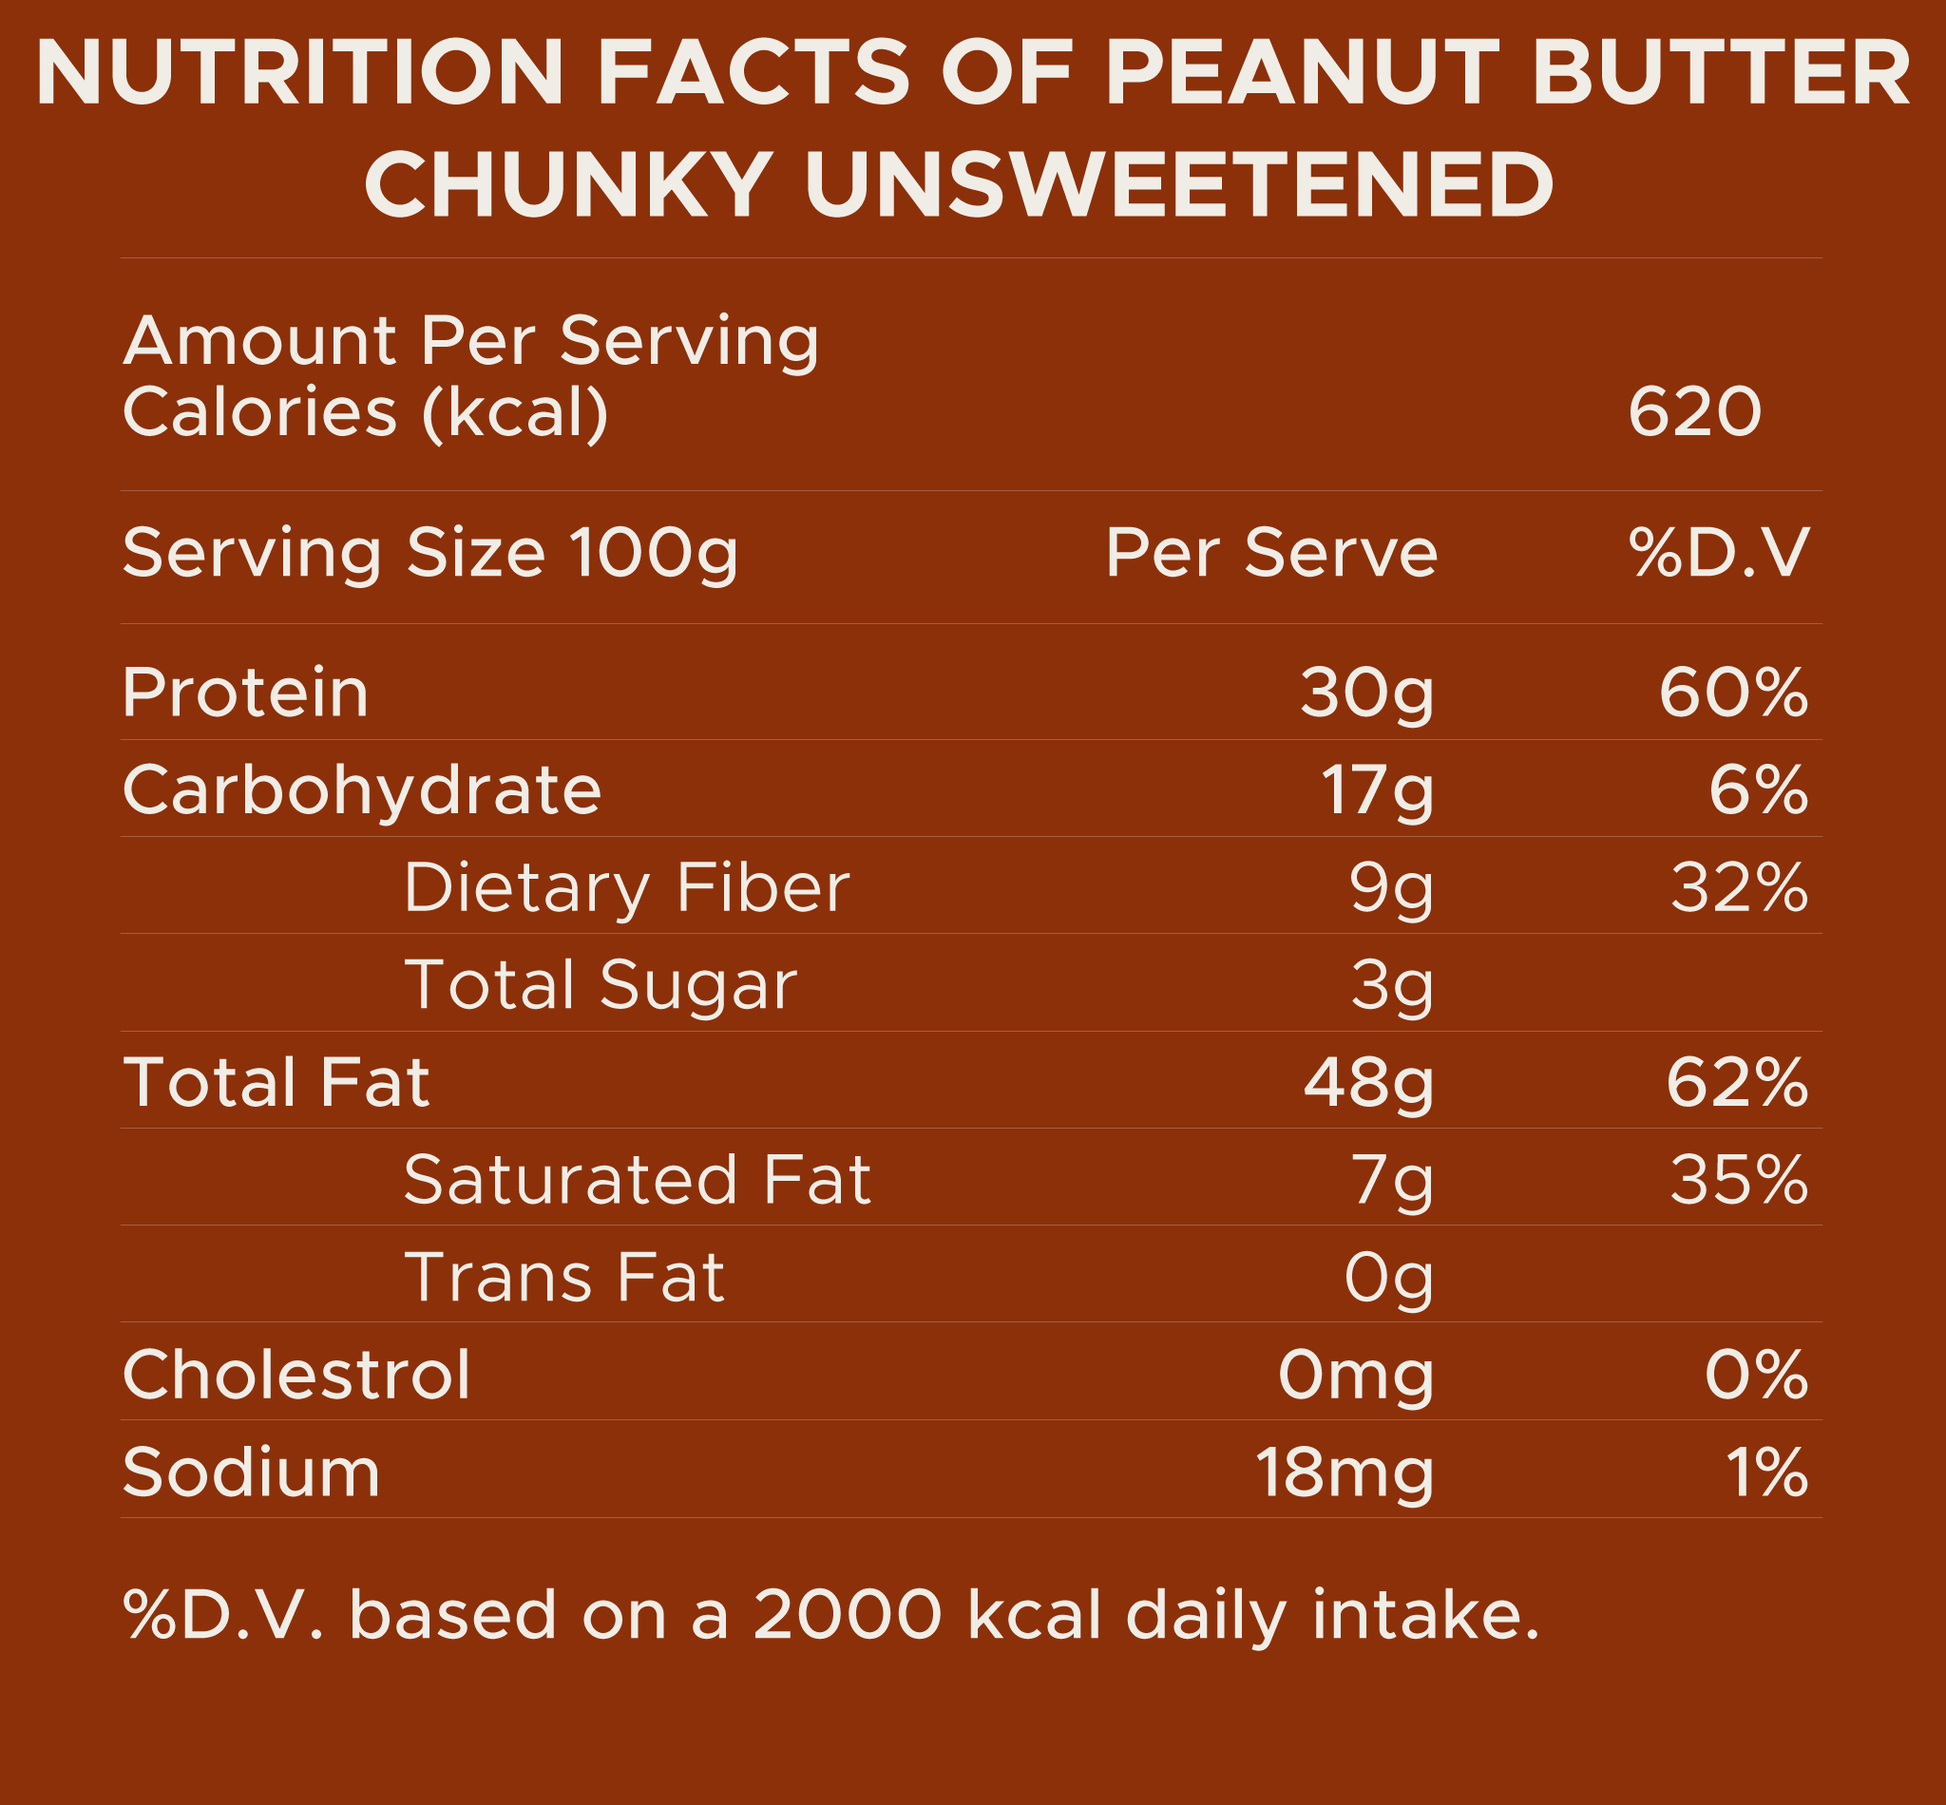 Peanut Butter - Crunchy Unsweetened - Buy 1 Get 1 Free - Nutrabox India